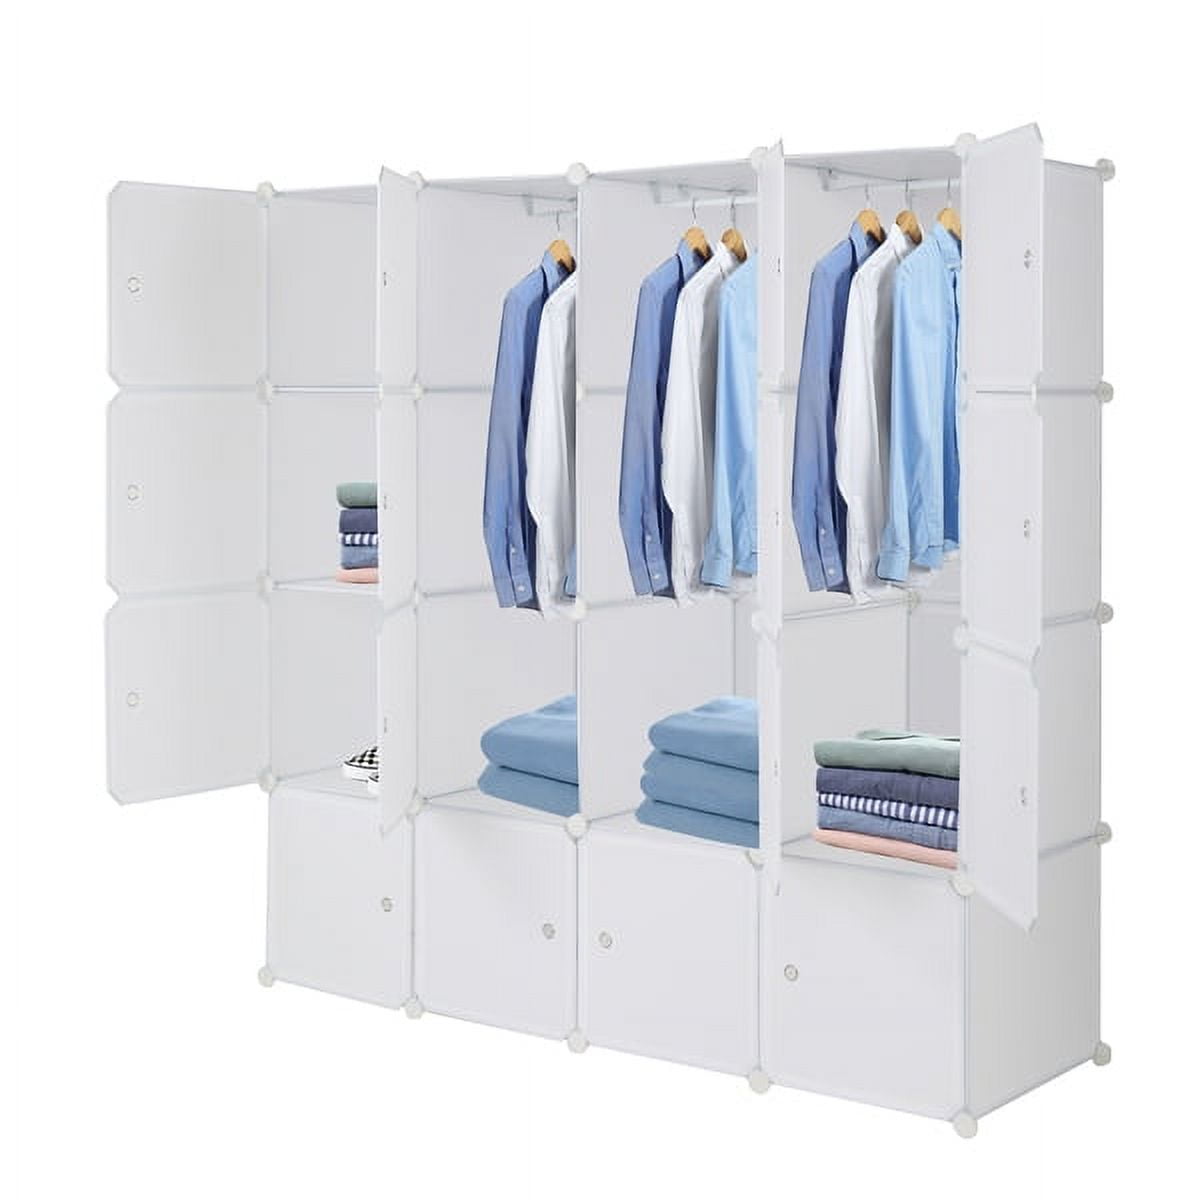 Tangkula 16 Cubes Portable Wardrobe Closet, Combination Bedroom Dresser  Armoire with Hanging Sections, Cube Storage Organizer for Hanging Clothes,  DIY